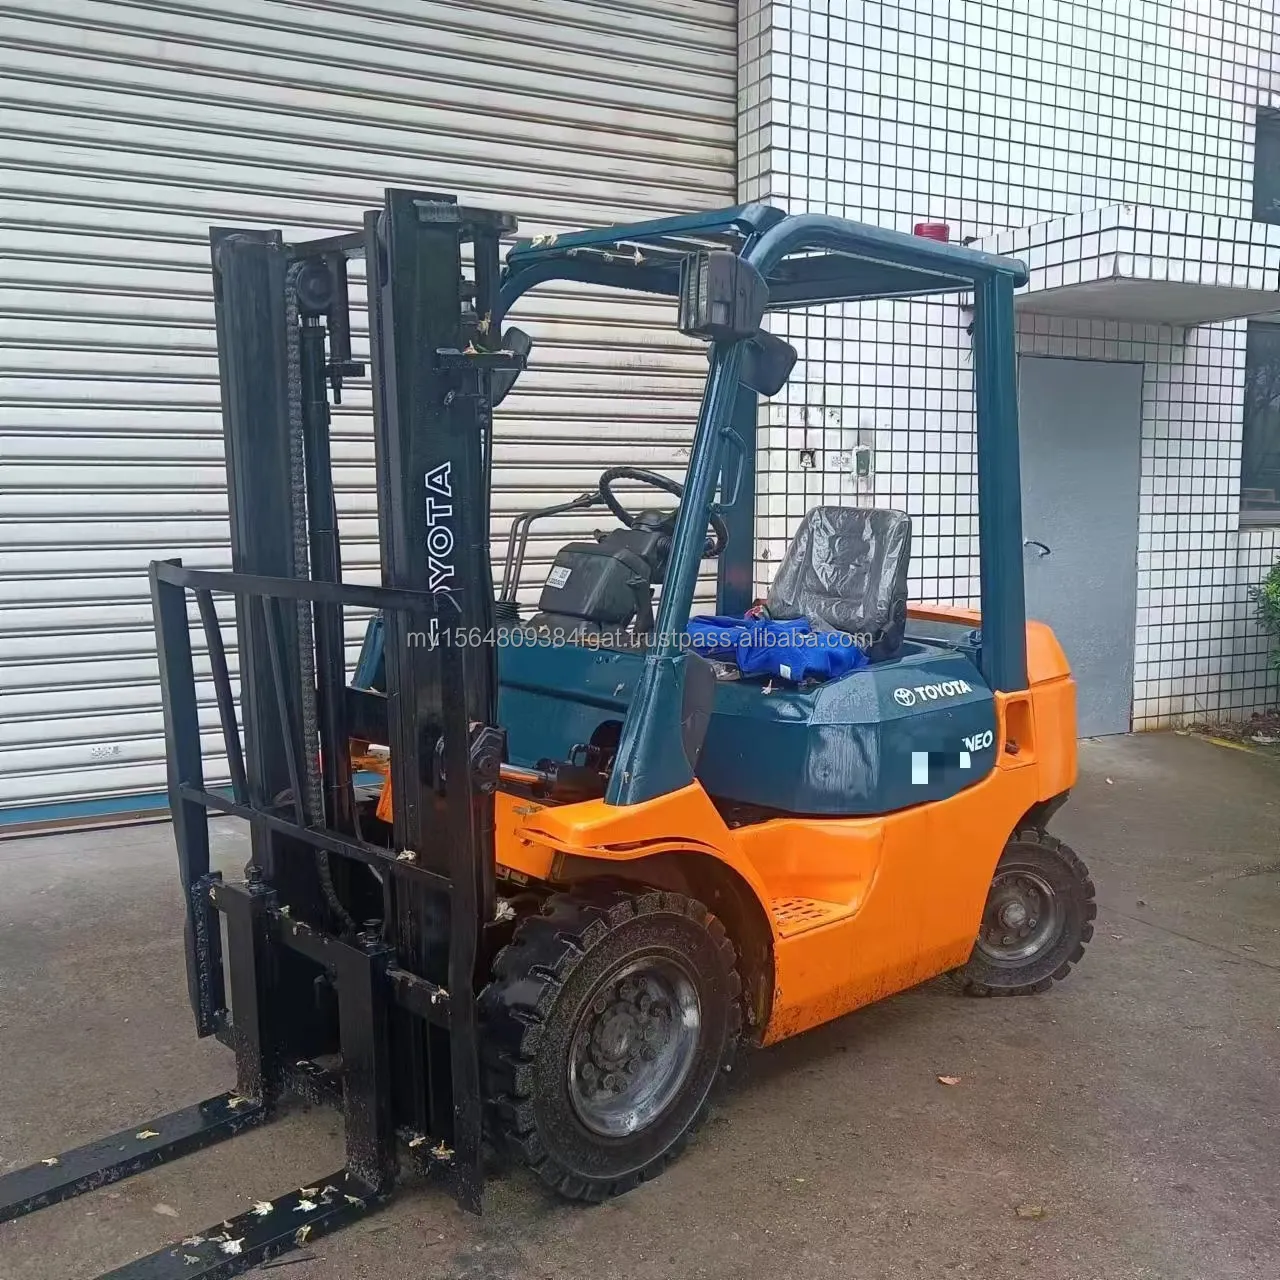 Wholesales machine seated used 3 ton manual forklift TOYOTA FD30 Forklift in sale